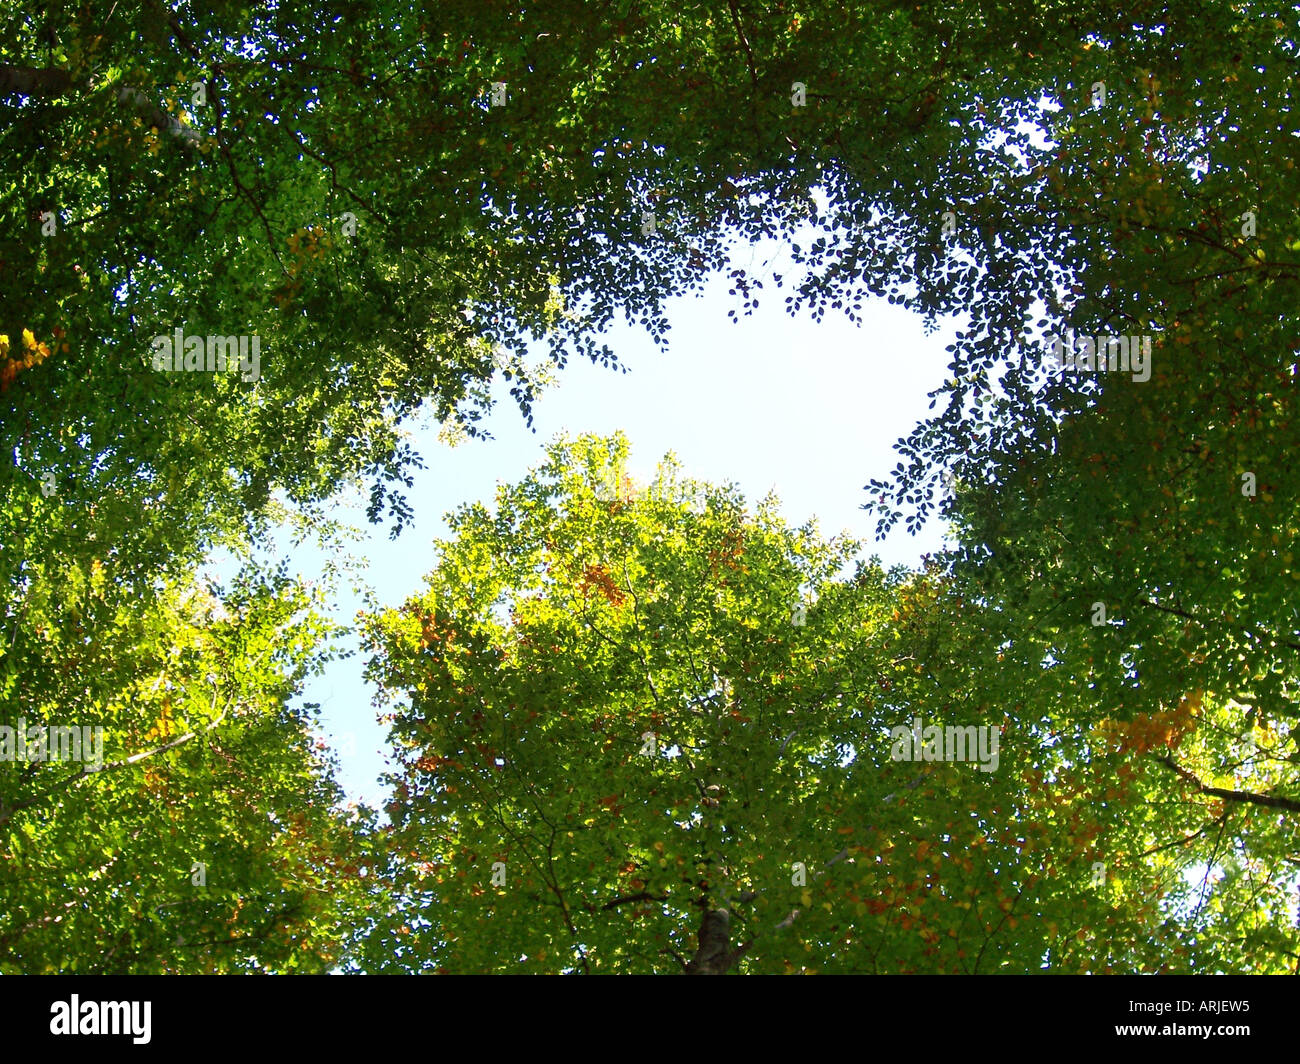 Frame filling leaves on trees with small text frame in the centre Stock Photo